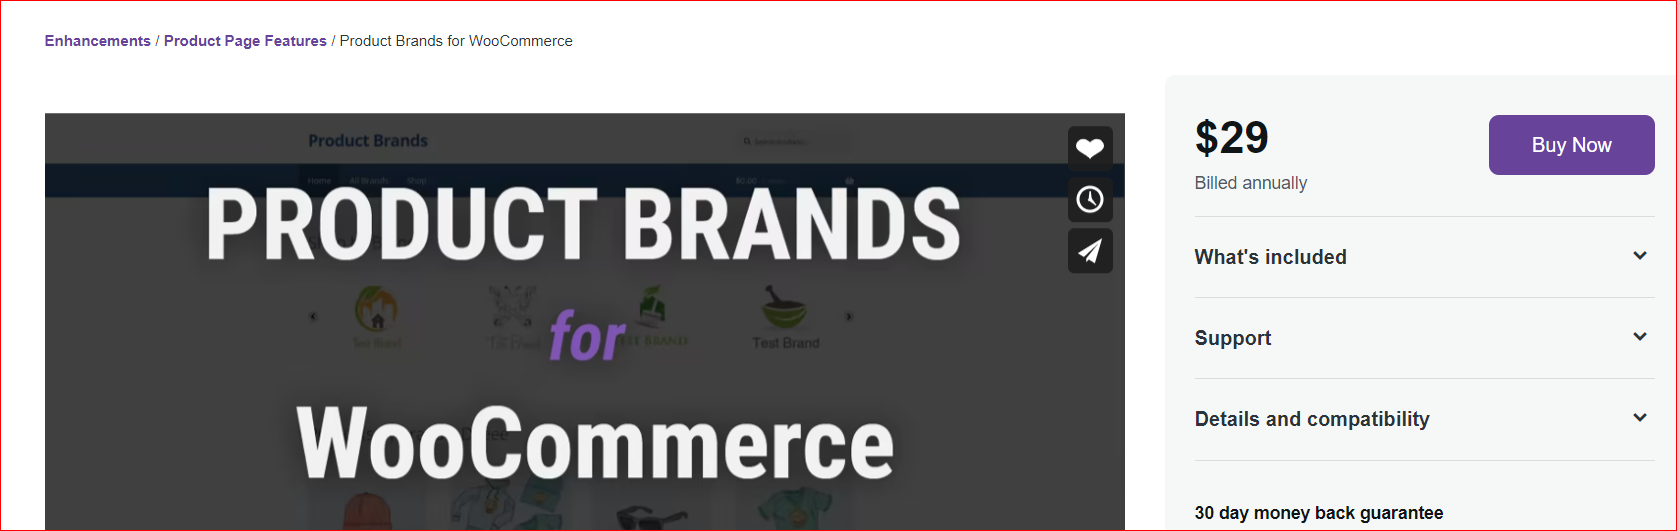 Product Brands for WooCommerce